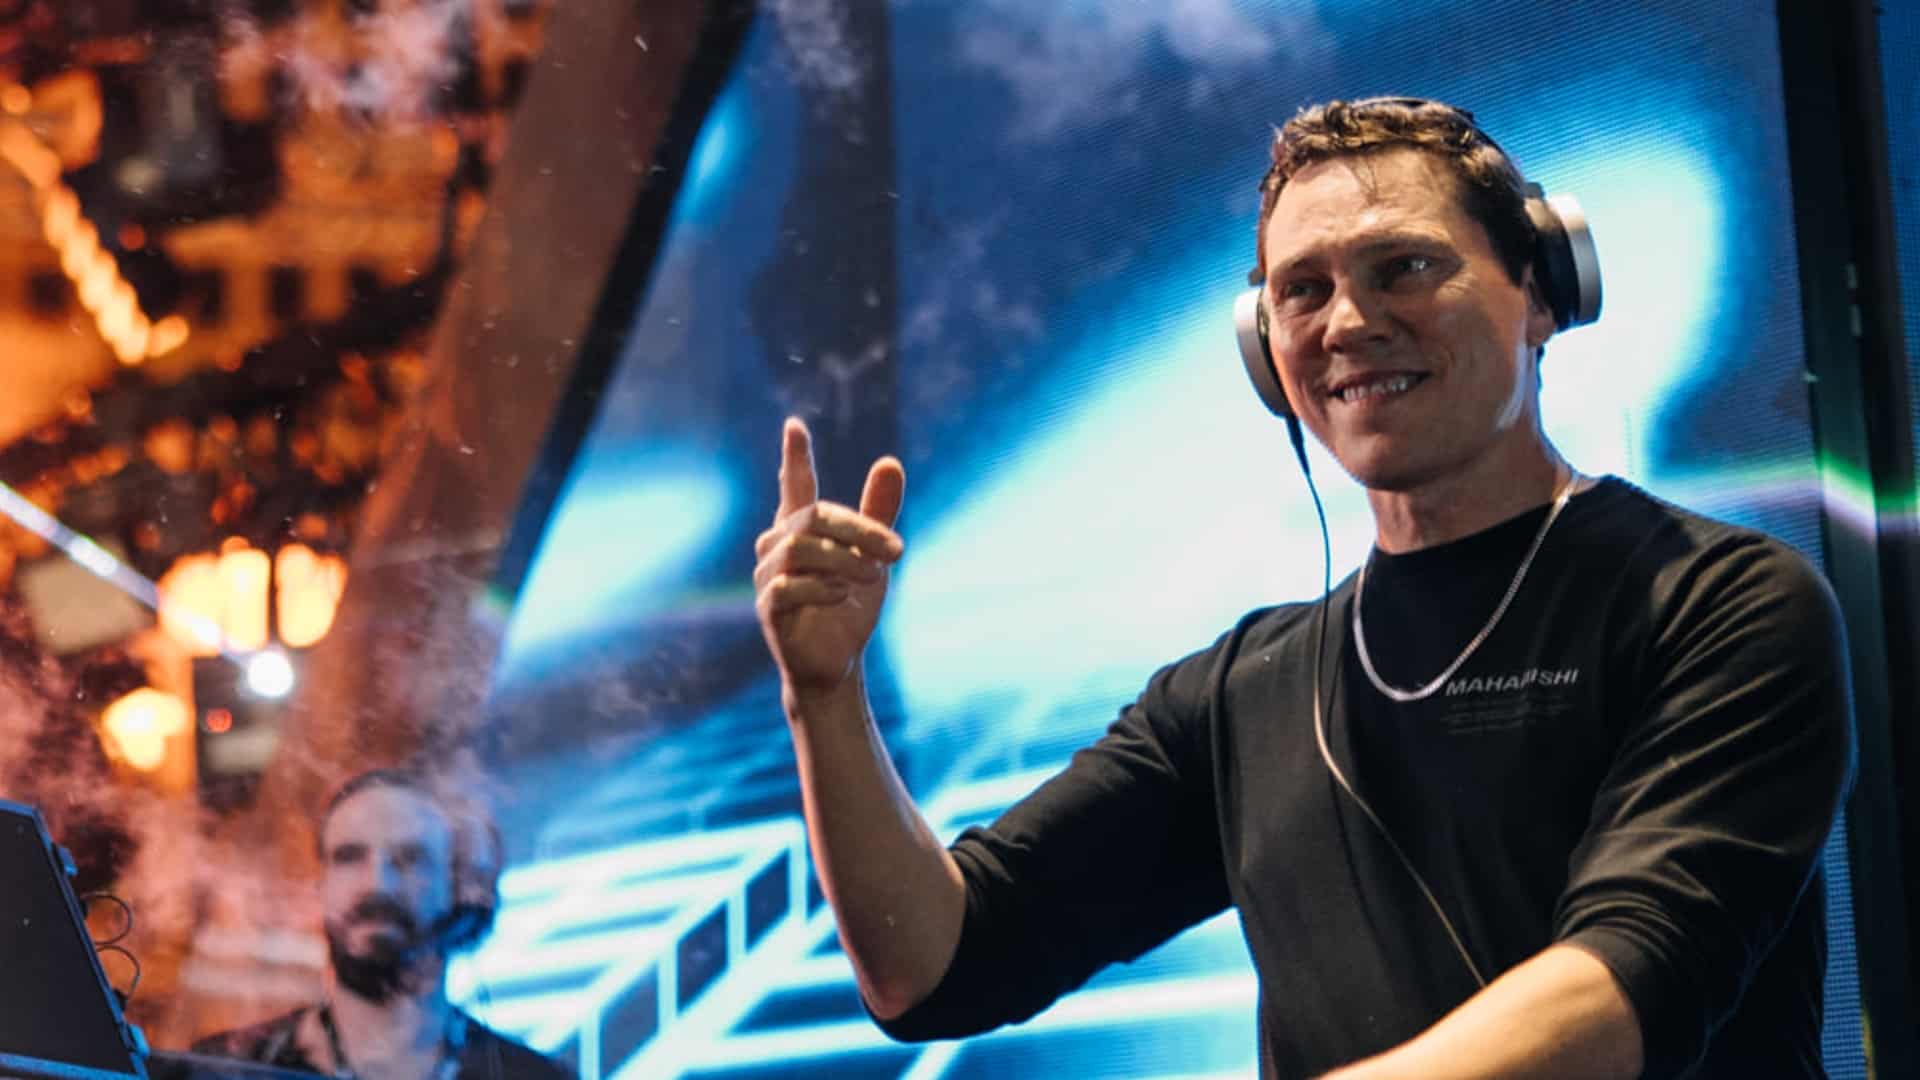 Tiësto provides his take on Notre Dame's ‘Yumi’ with stunning new remix